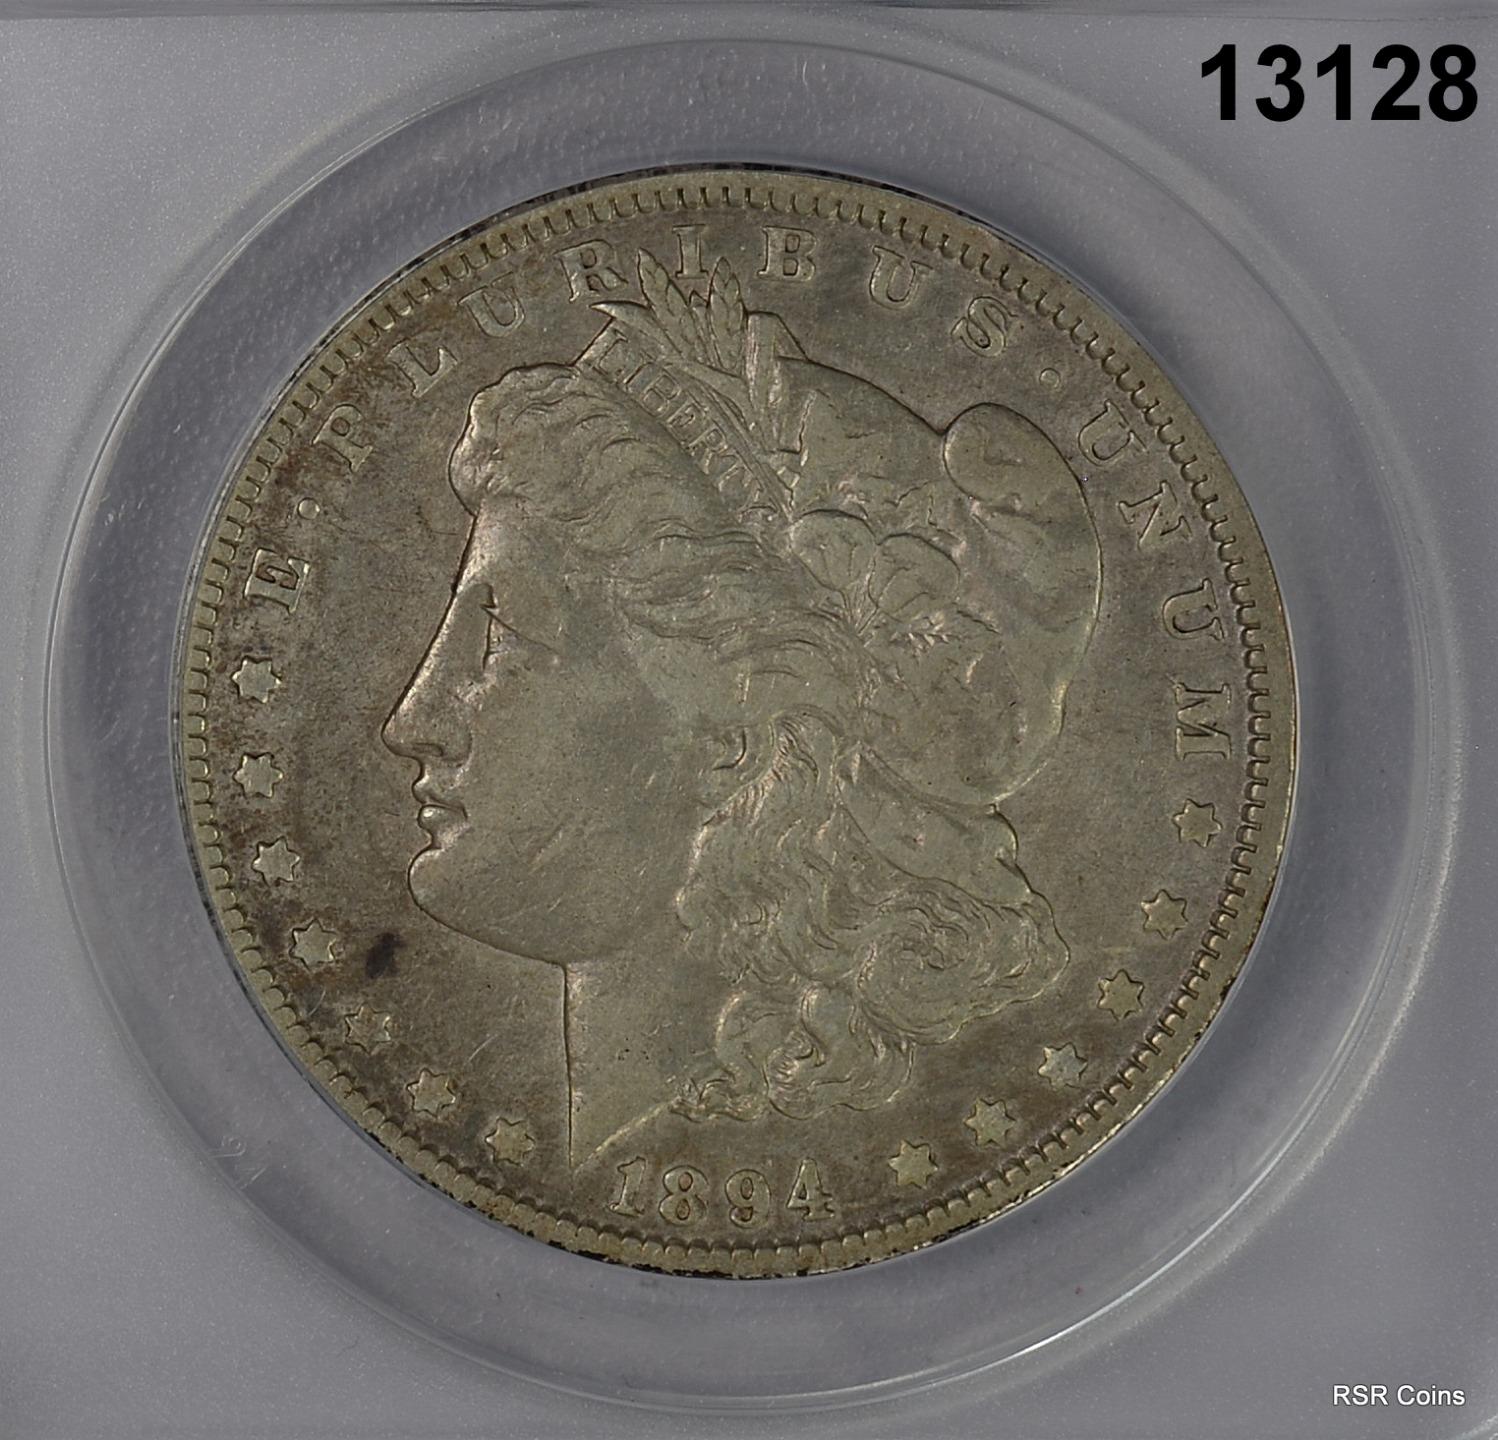 1894 O MORGAN SILVER DOLLAR ANACS CERTIFIED VF25 CLEANED BETTER DATE! #13128